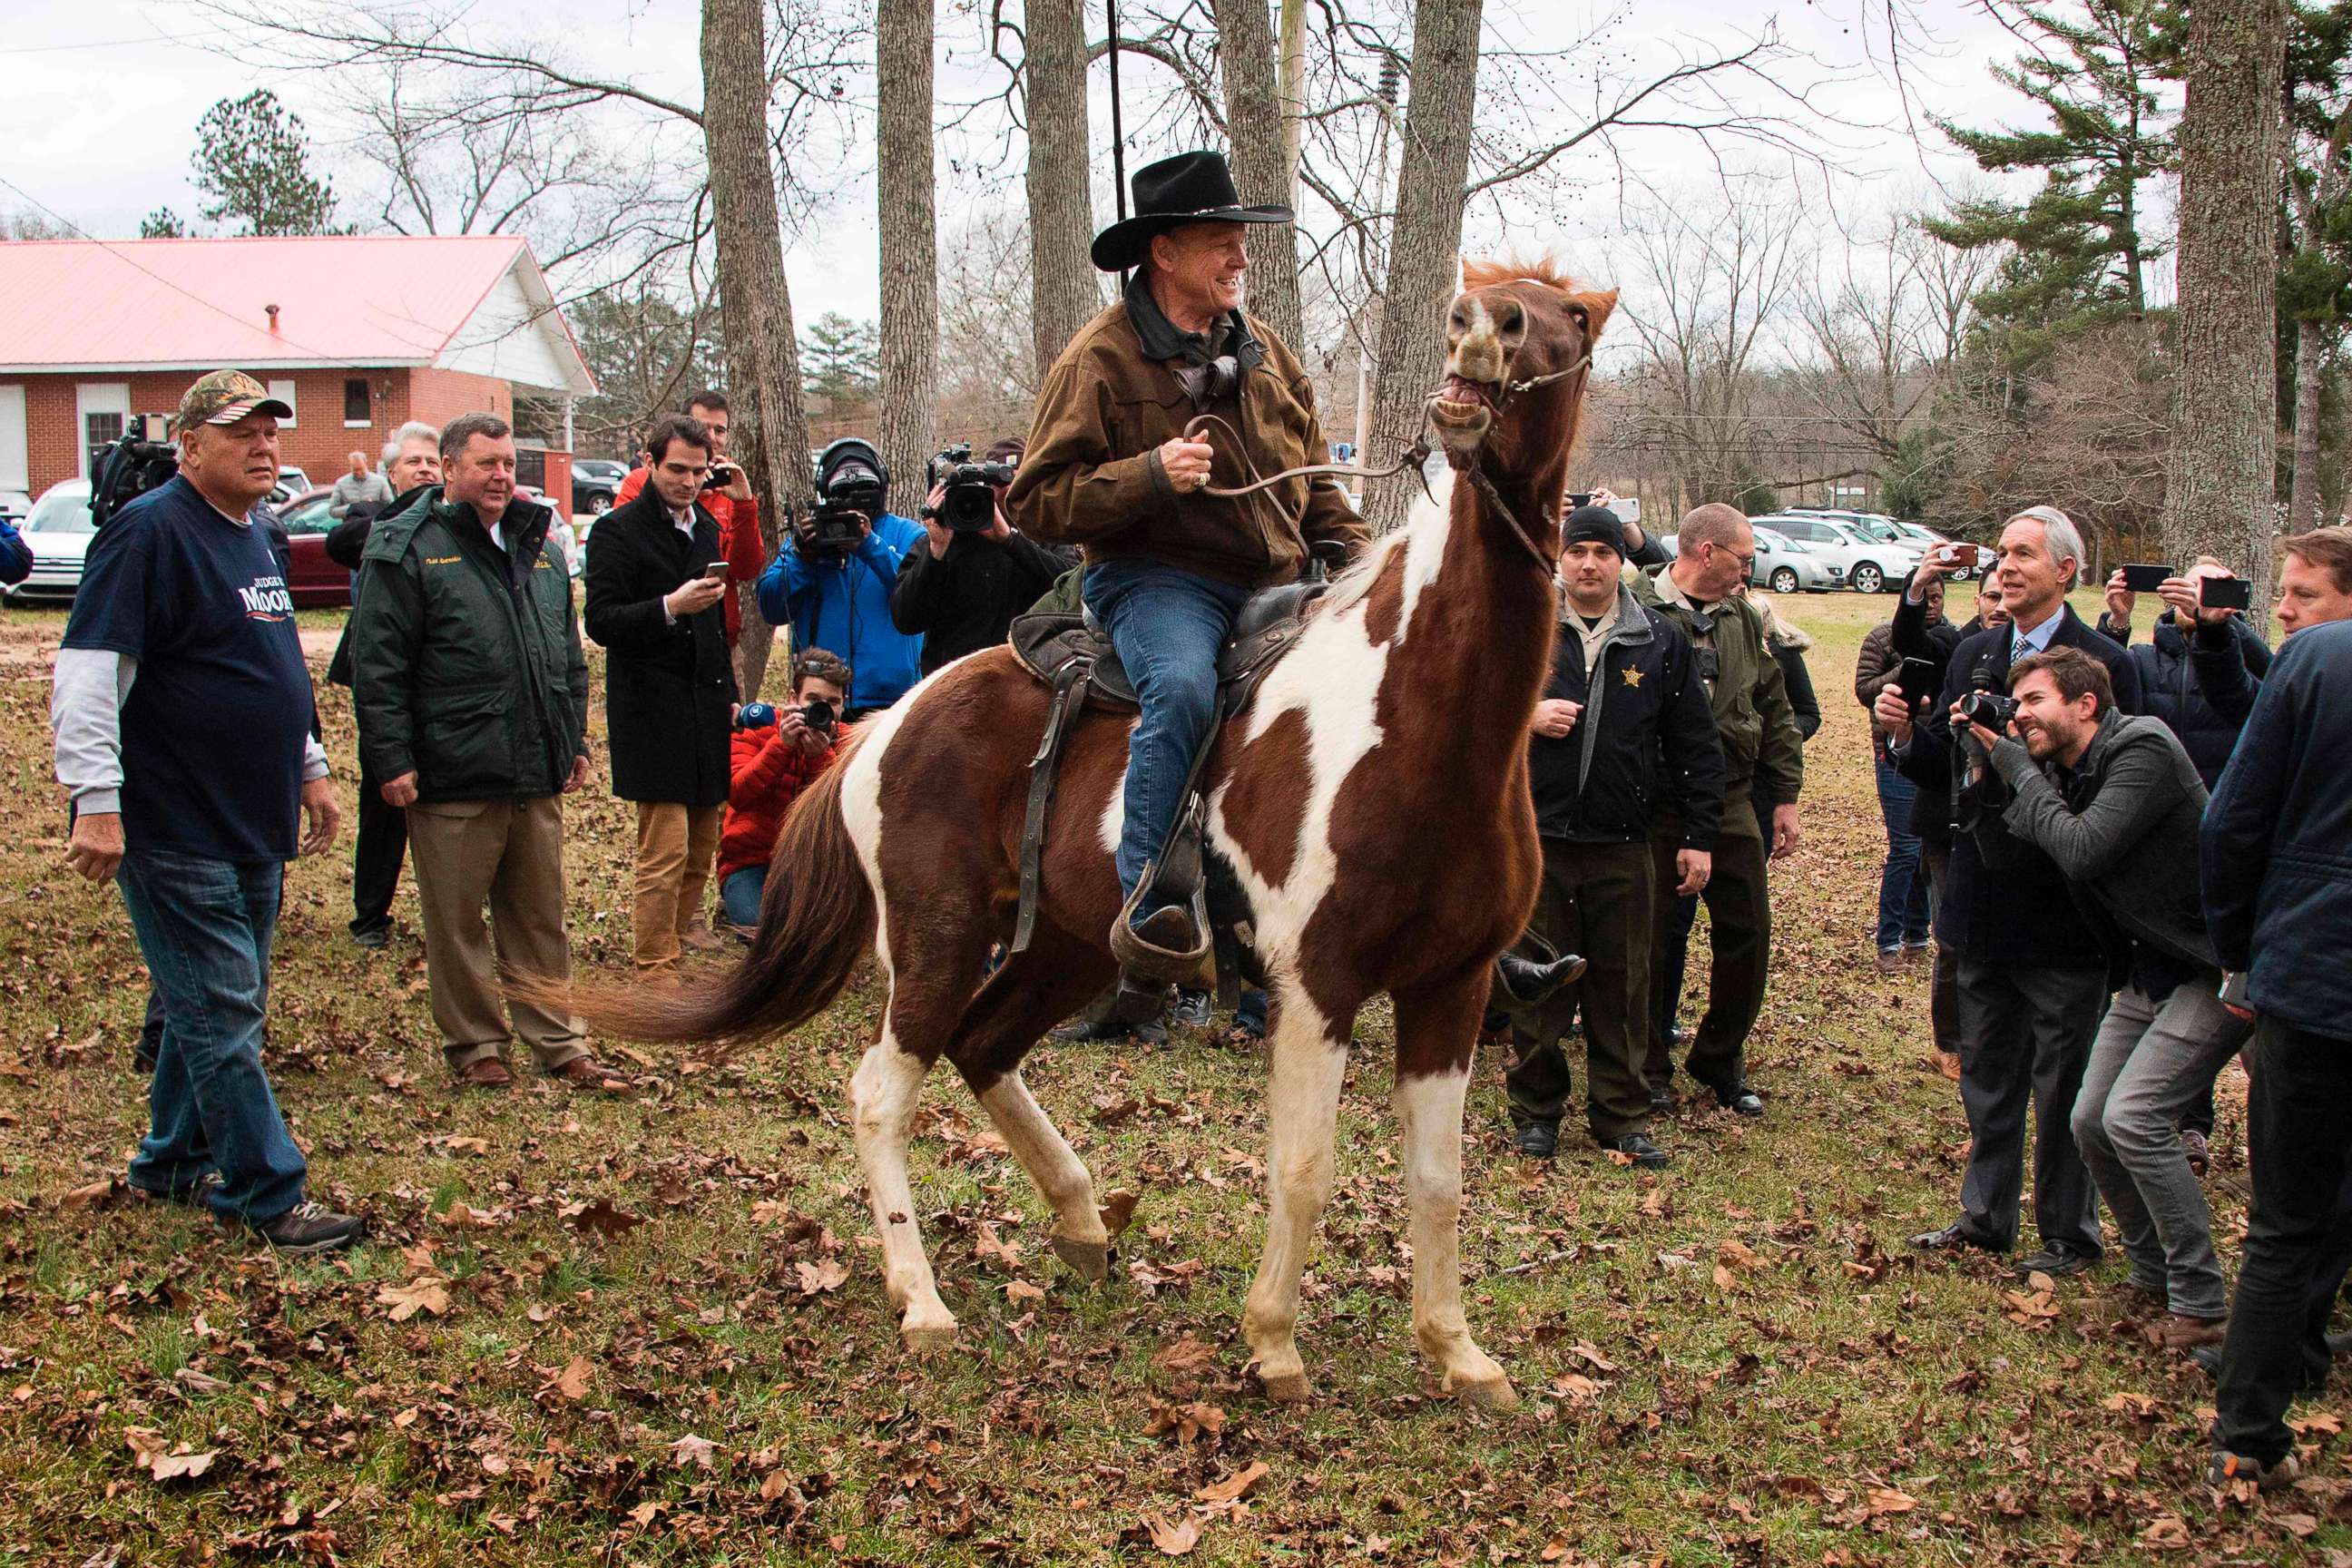 PHOTO: Republican senatorial candidate Roy Moore departs on his horse at the polling station after voting in Gallant, Ala., Dec. 12, 2017.